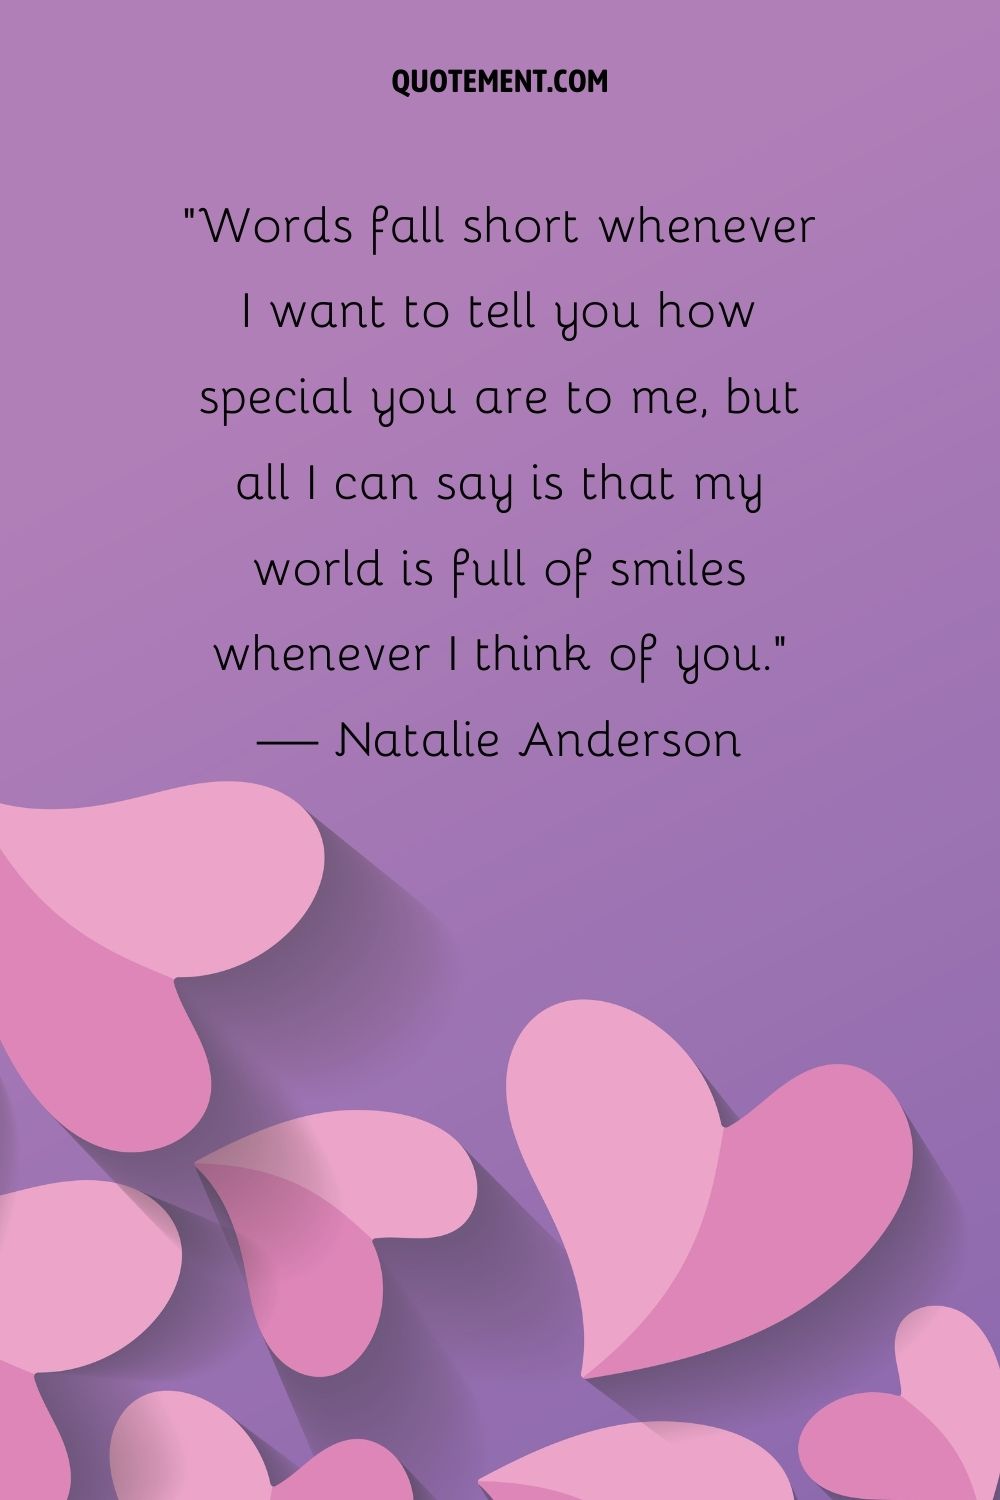 Hearts on a purple background representing you are special quote.